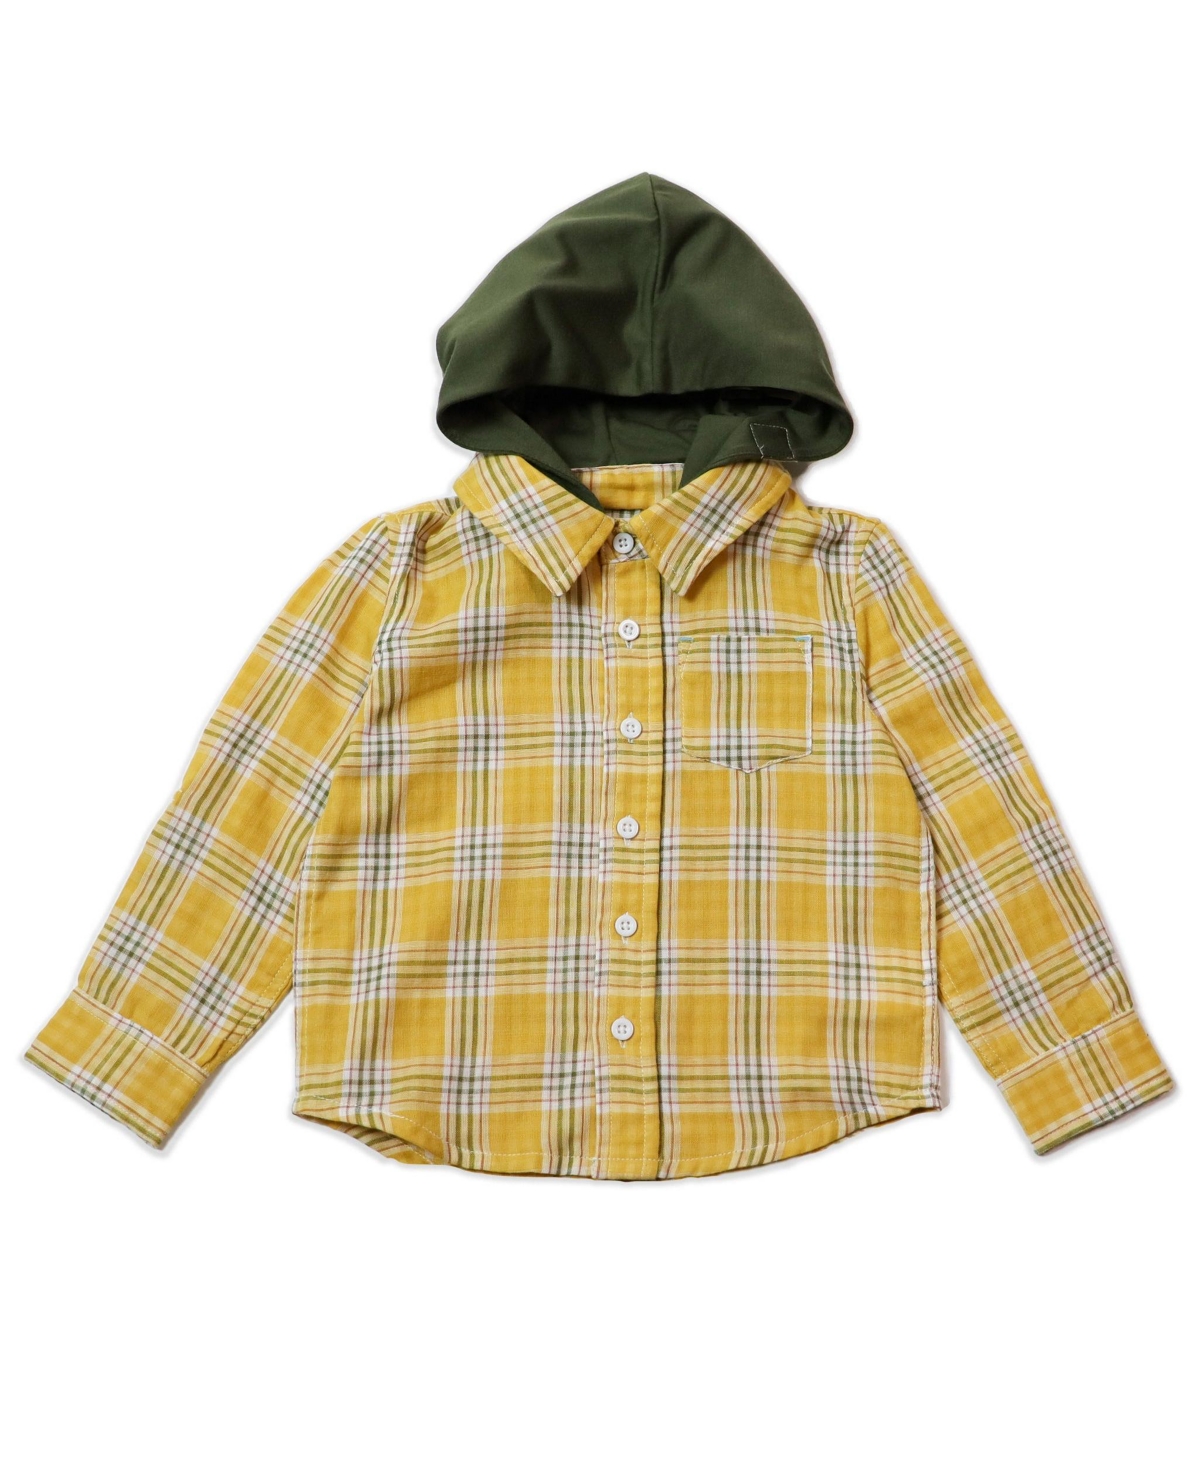 THOUGHTFULLY HOODED AUSTIN TODDLER BOYS PLAID BUTTON UP SHIRT WITH REMOVABLE HOOD